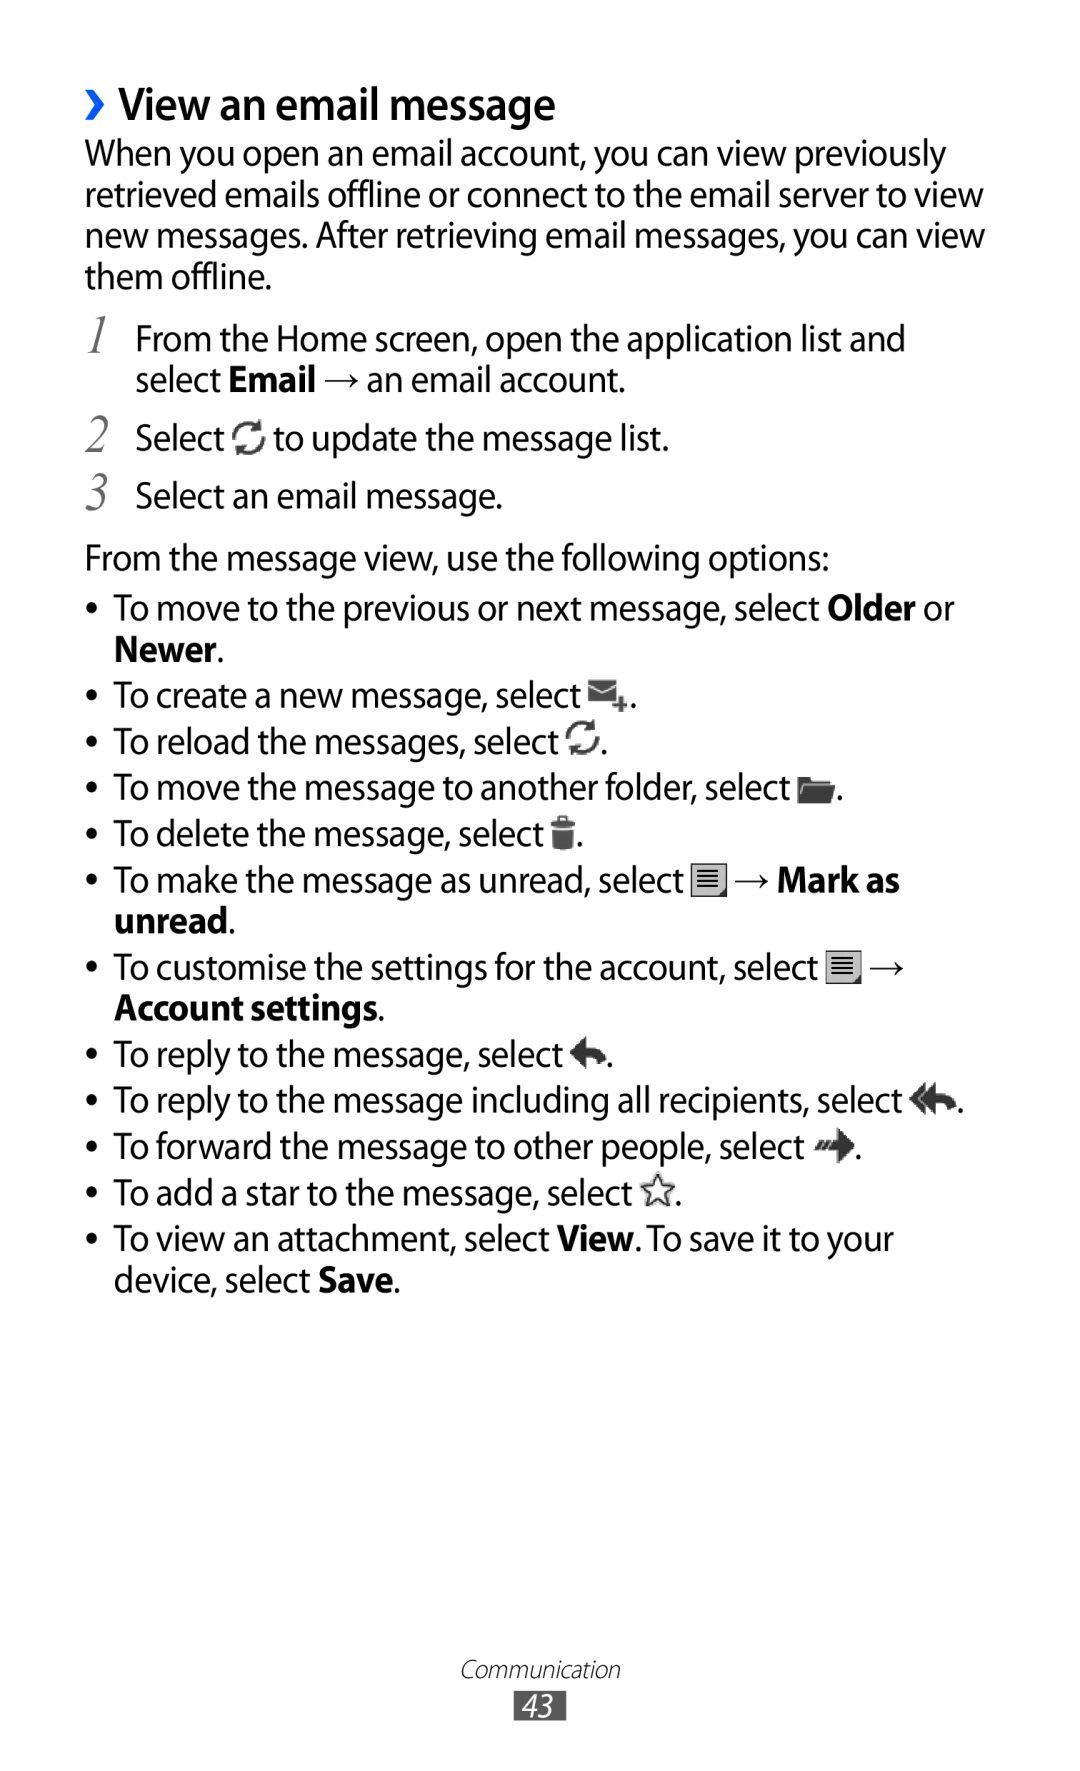 Samsung GT-P7510 user manual ››View an email message, To create a new message, select . To reload the messages, select 